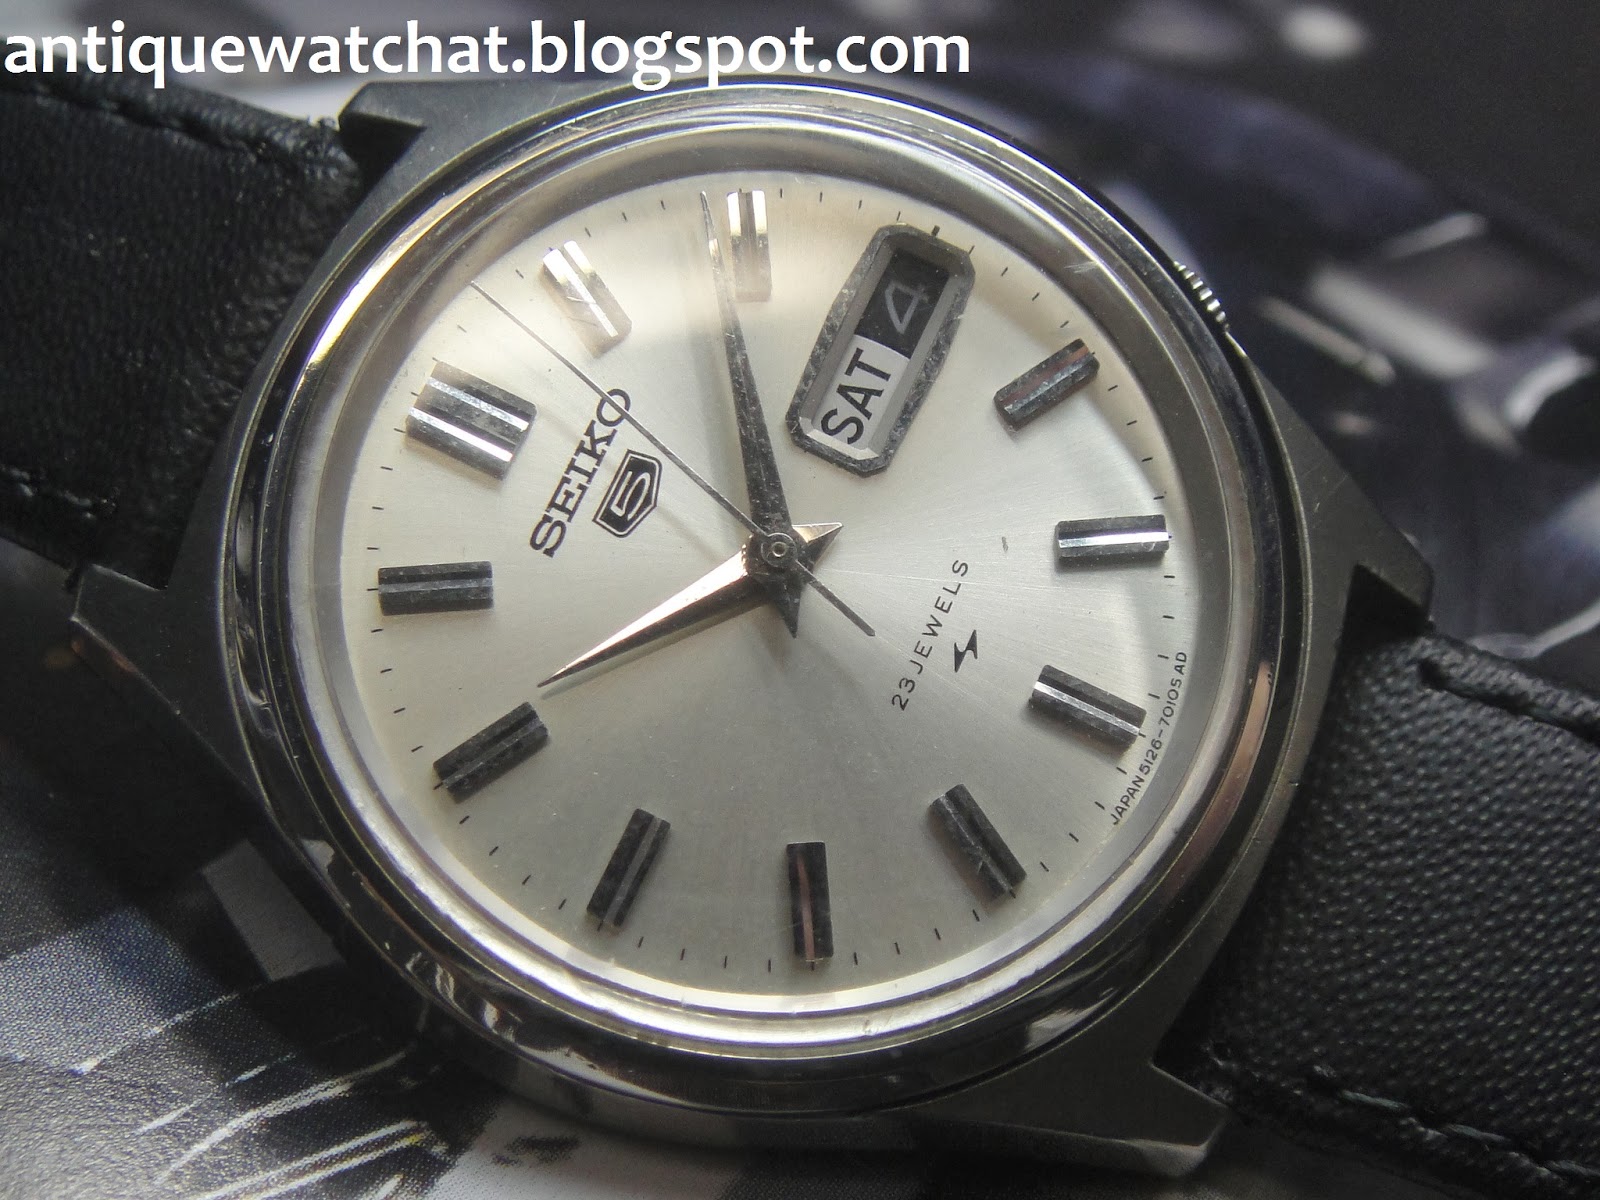 Antique Watch Bar: SEIKO 5 AUTOMATIC 5126-7010 S5A52 (SOLD)